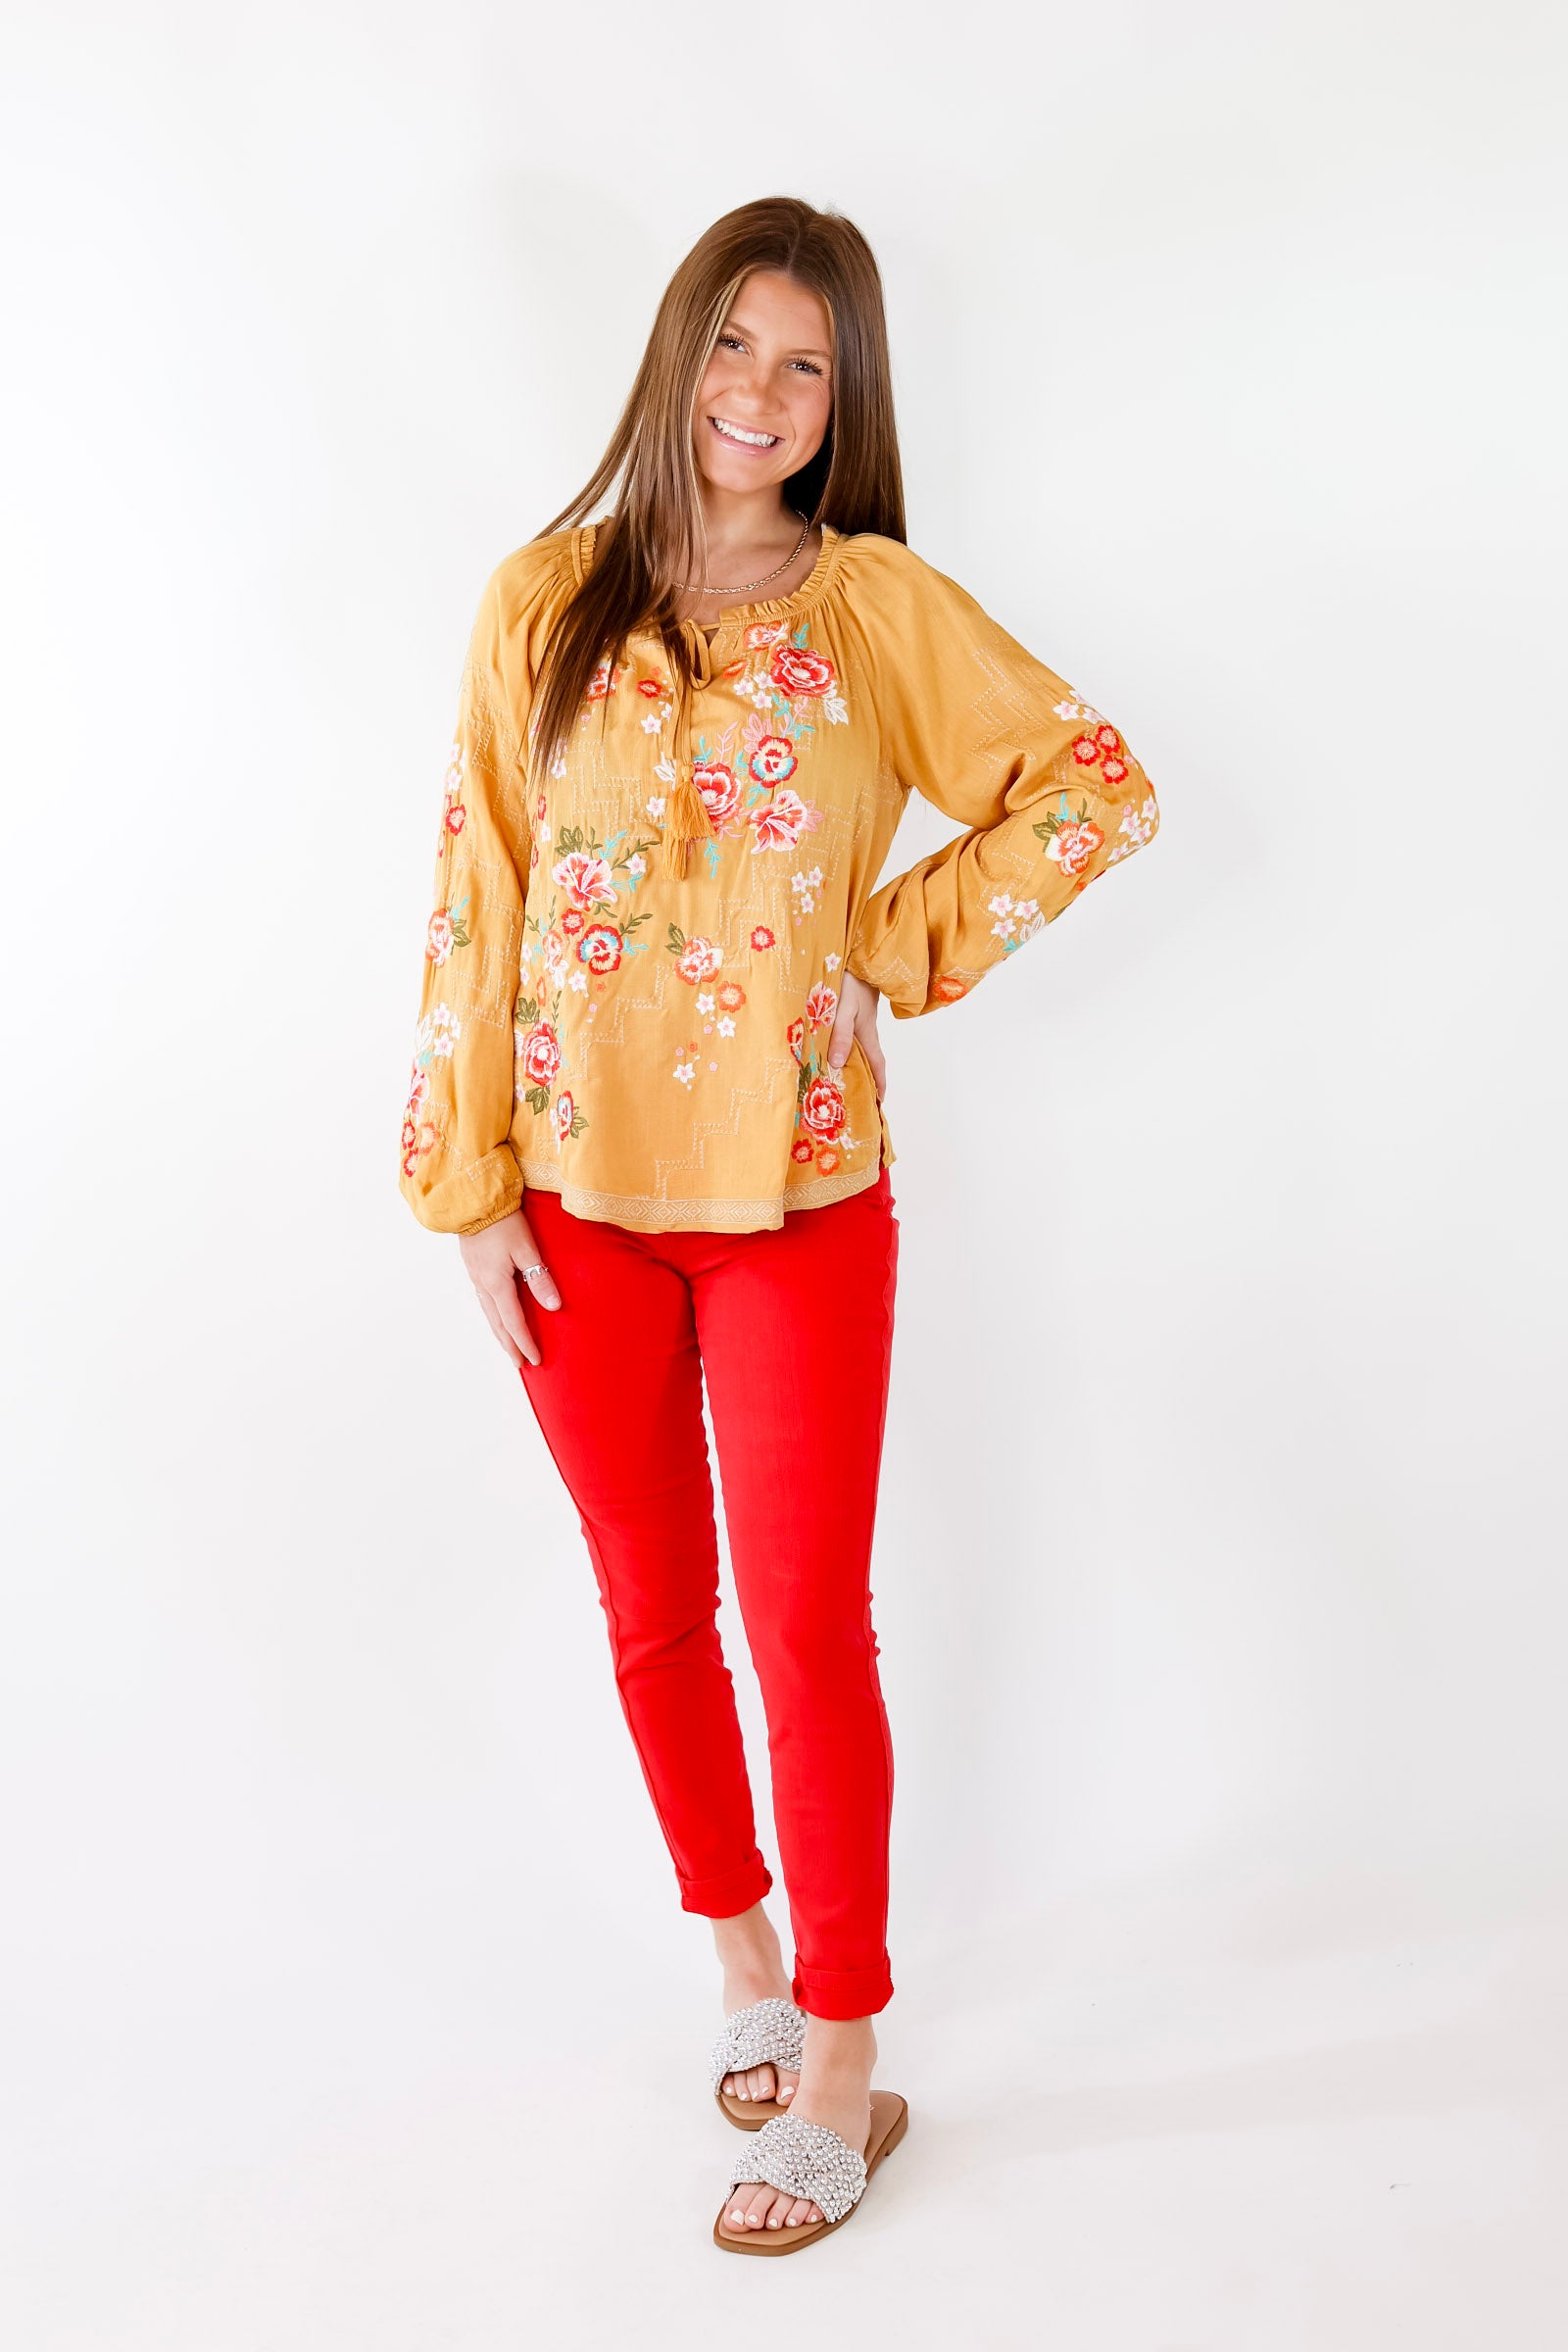 Fashionably Late Embroidered Long Sleeve Top with Front Keyhole and Tie in Mustard Yellow - Giddy Up Glamour Boutique